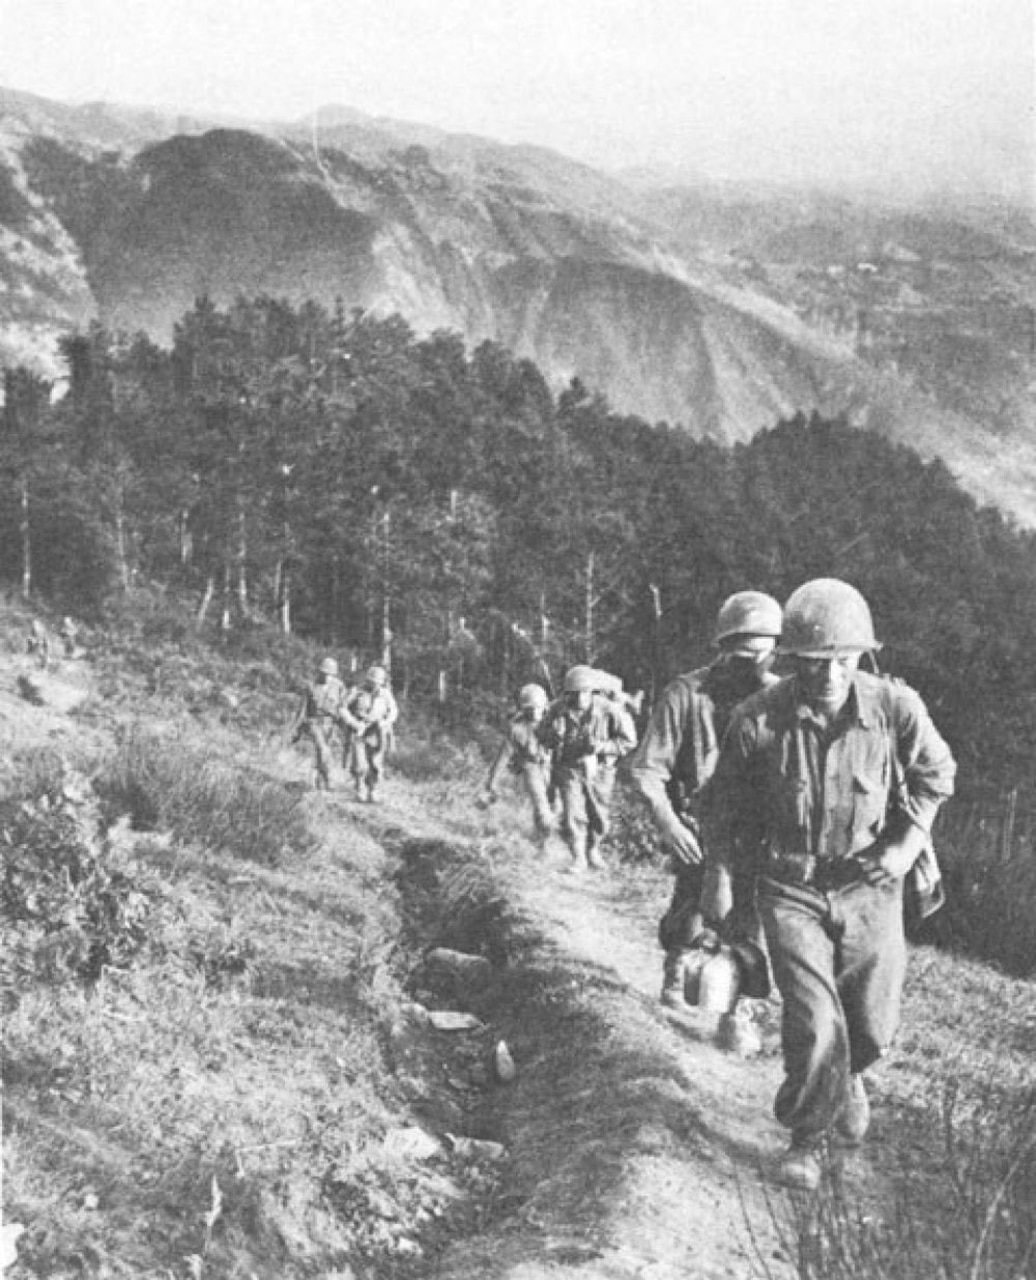 Soldiers march in line up a mountainside.